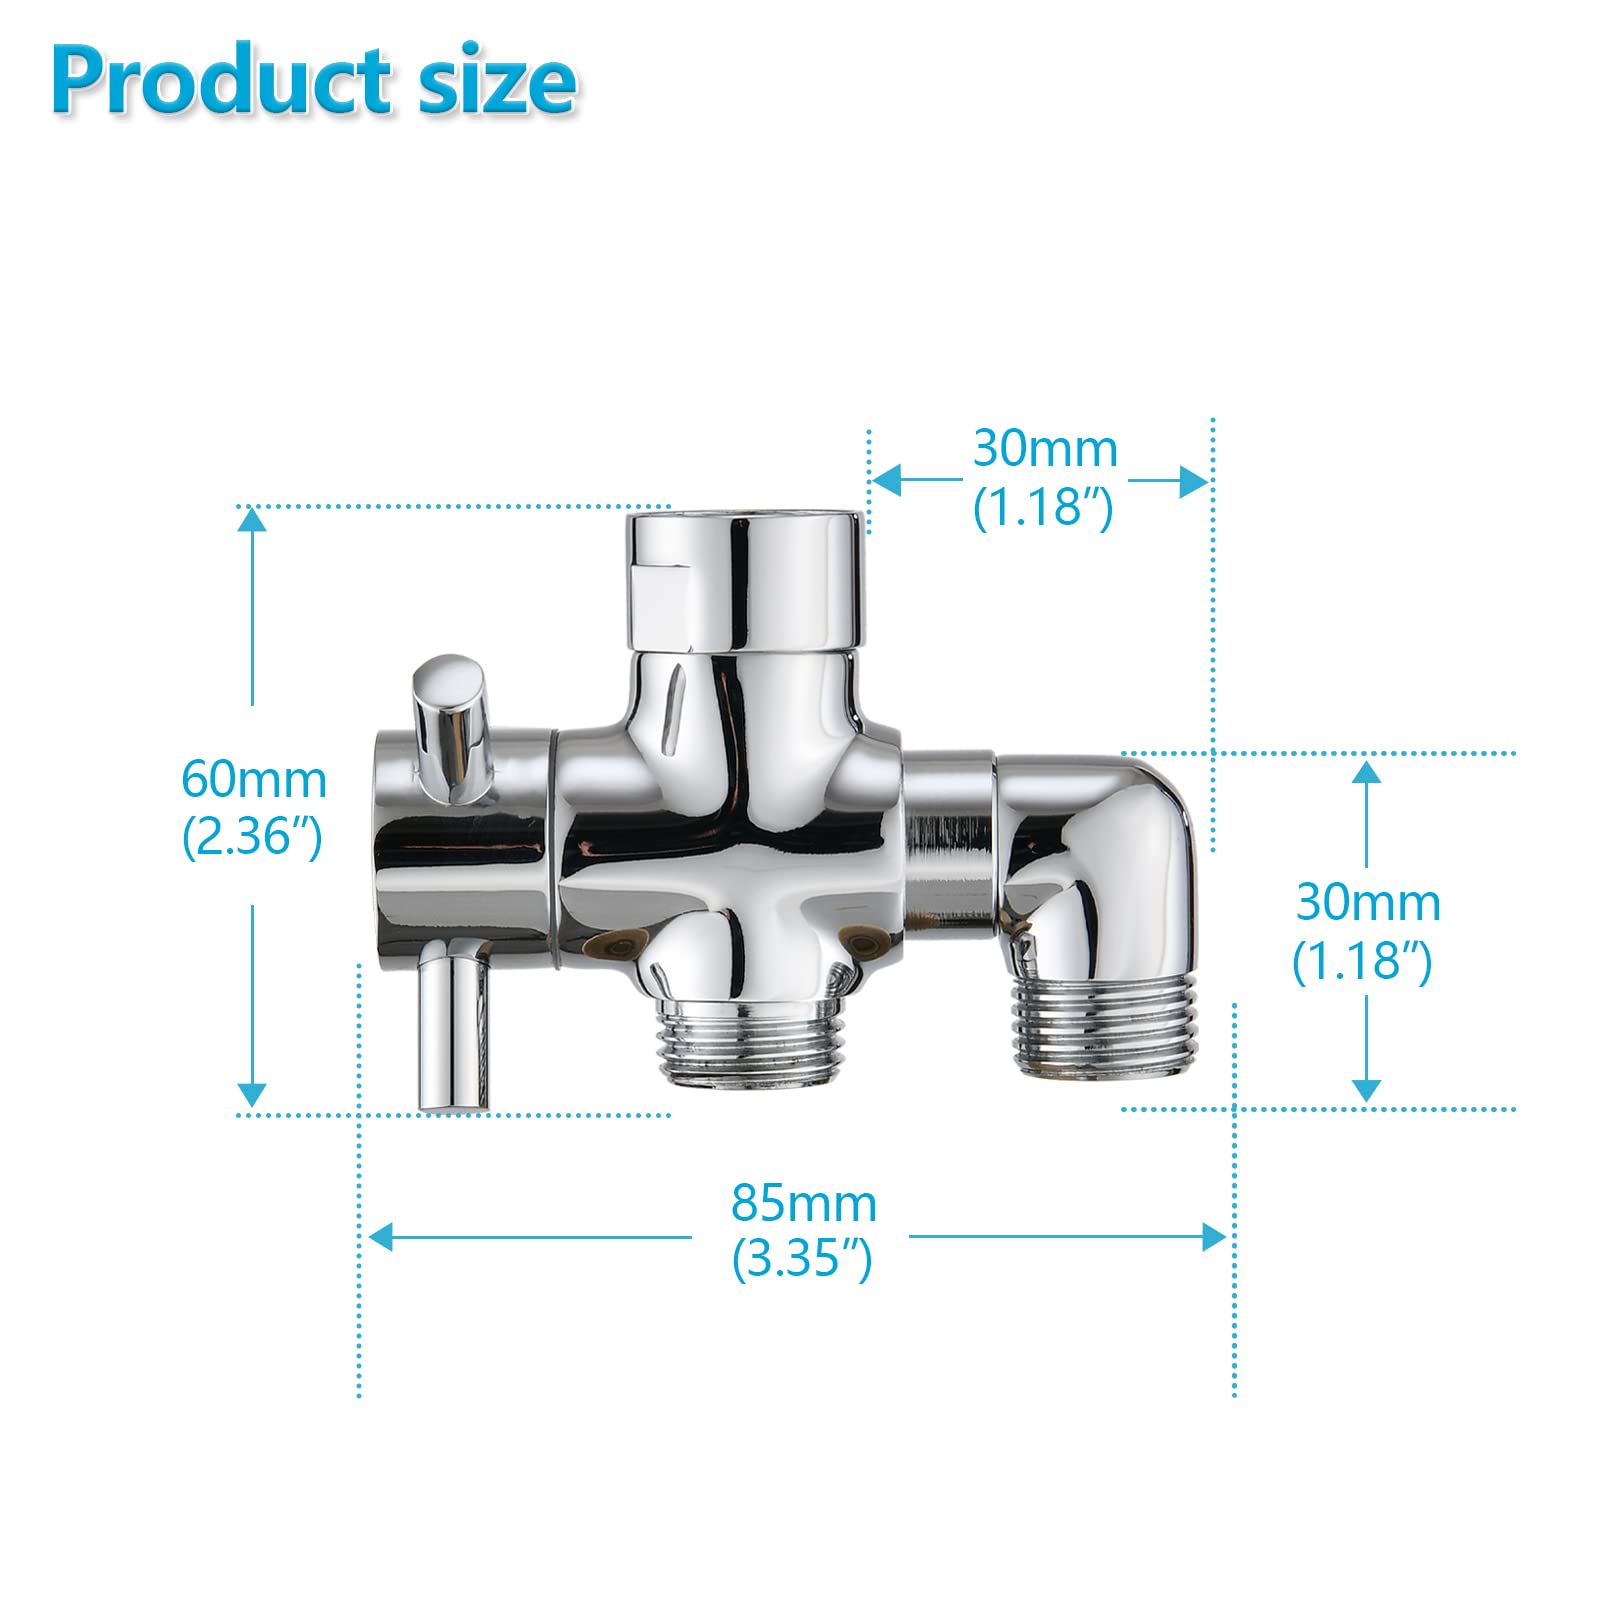 PDPBath Brass 3 Way Shower Arm Diverter Valve for Handheld Shower Head and Fixed Shower Head, G1/2 Universal Connection - Chrome